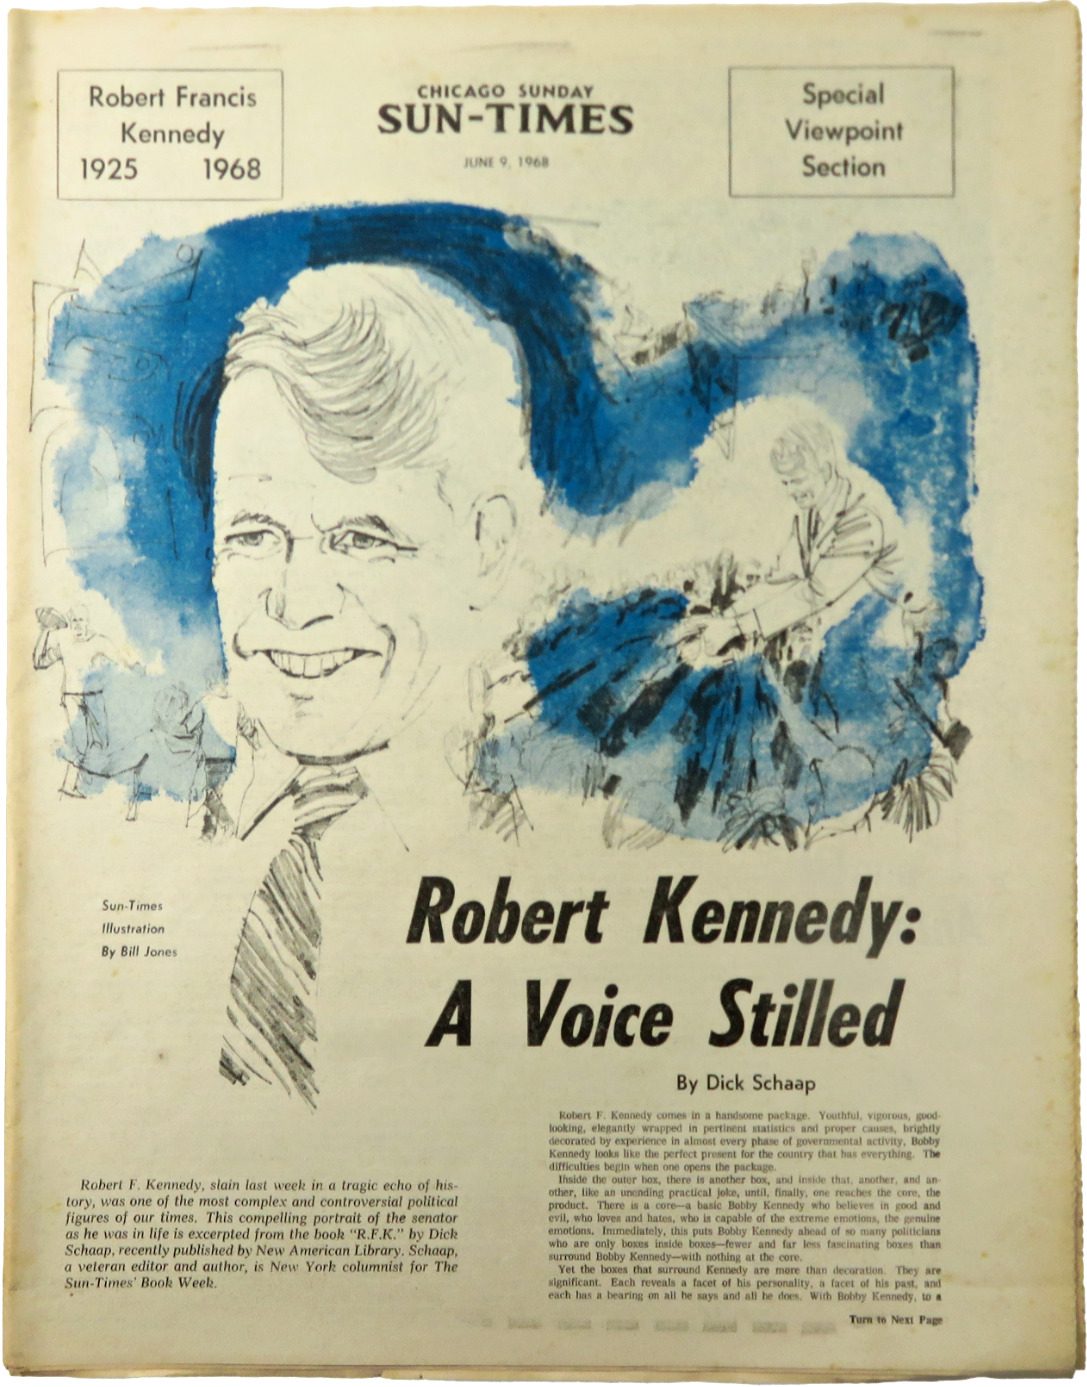 Chicago Sun-Times Newspaper JUNE 9 1968 ROBERT F KENNEDY Special Viewpoint Sect.